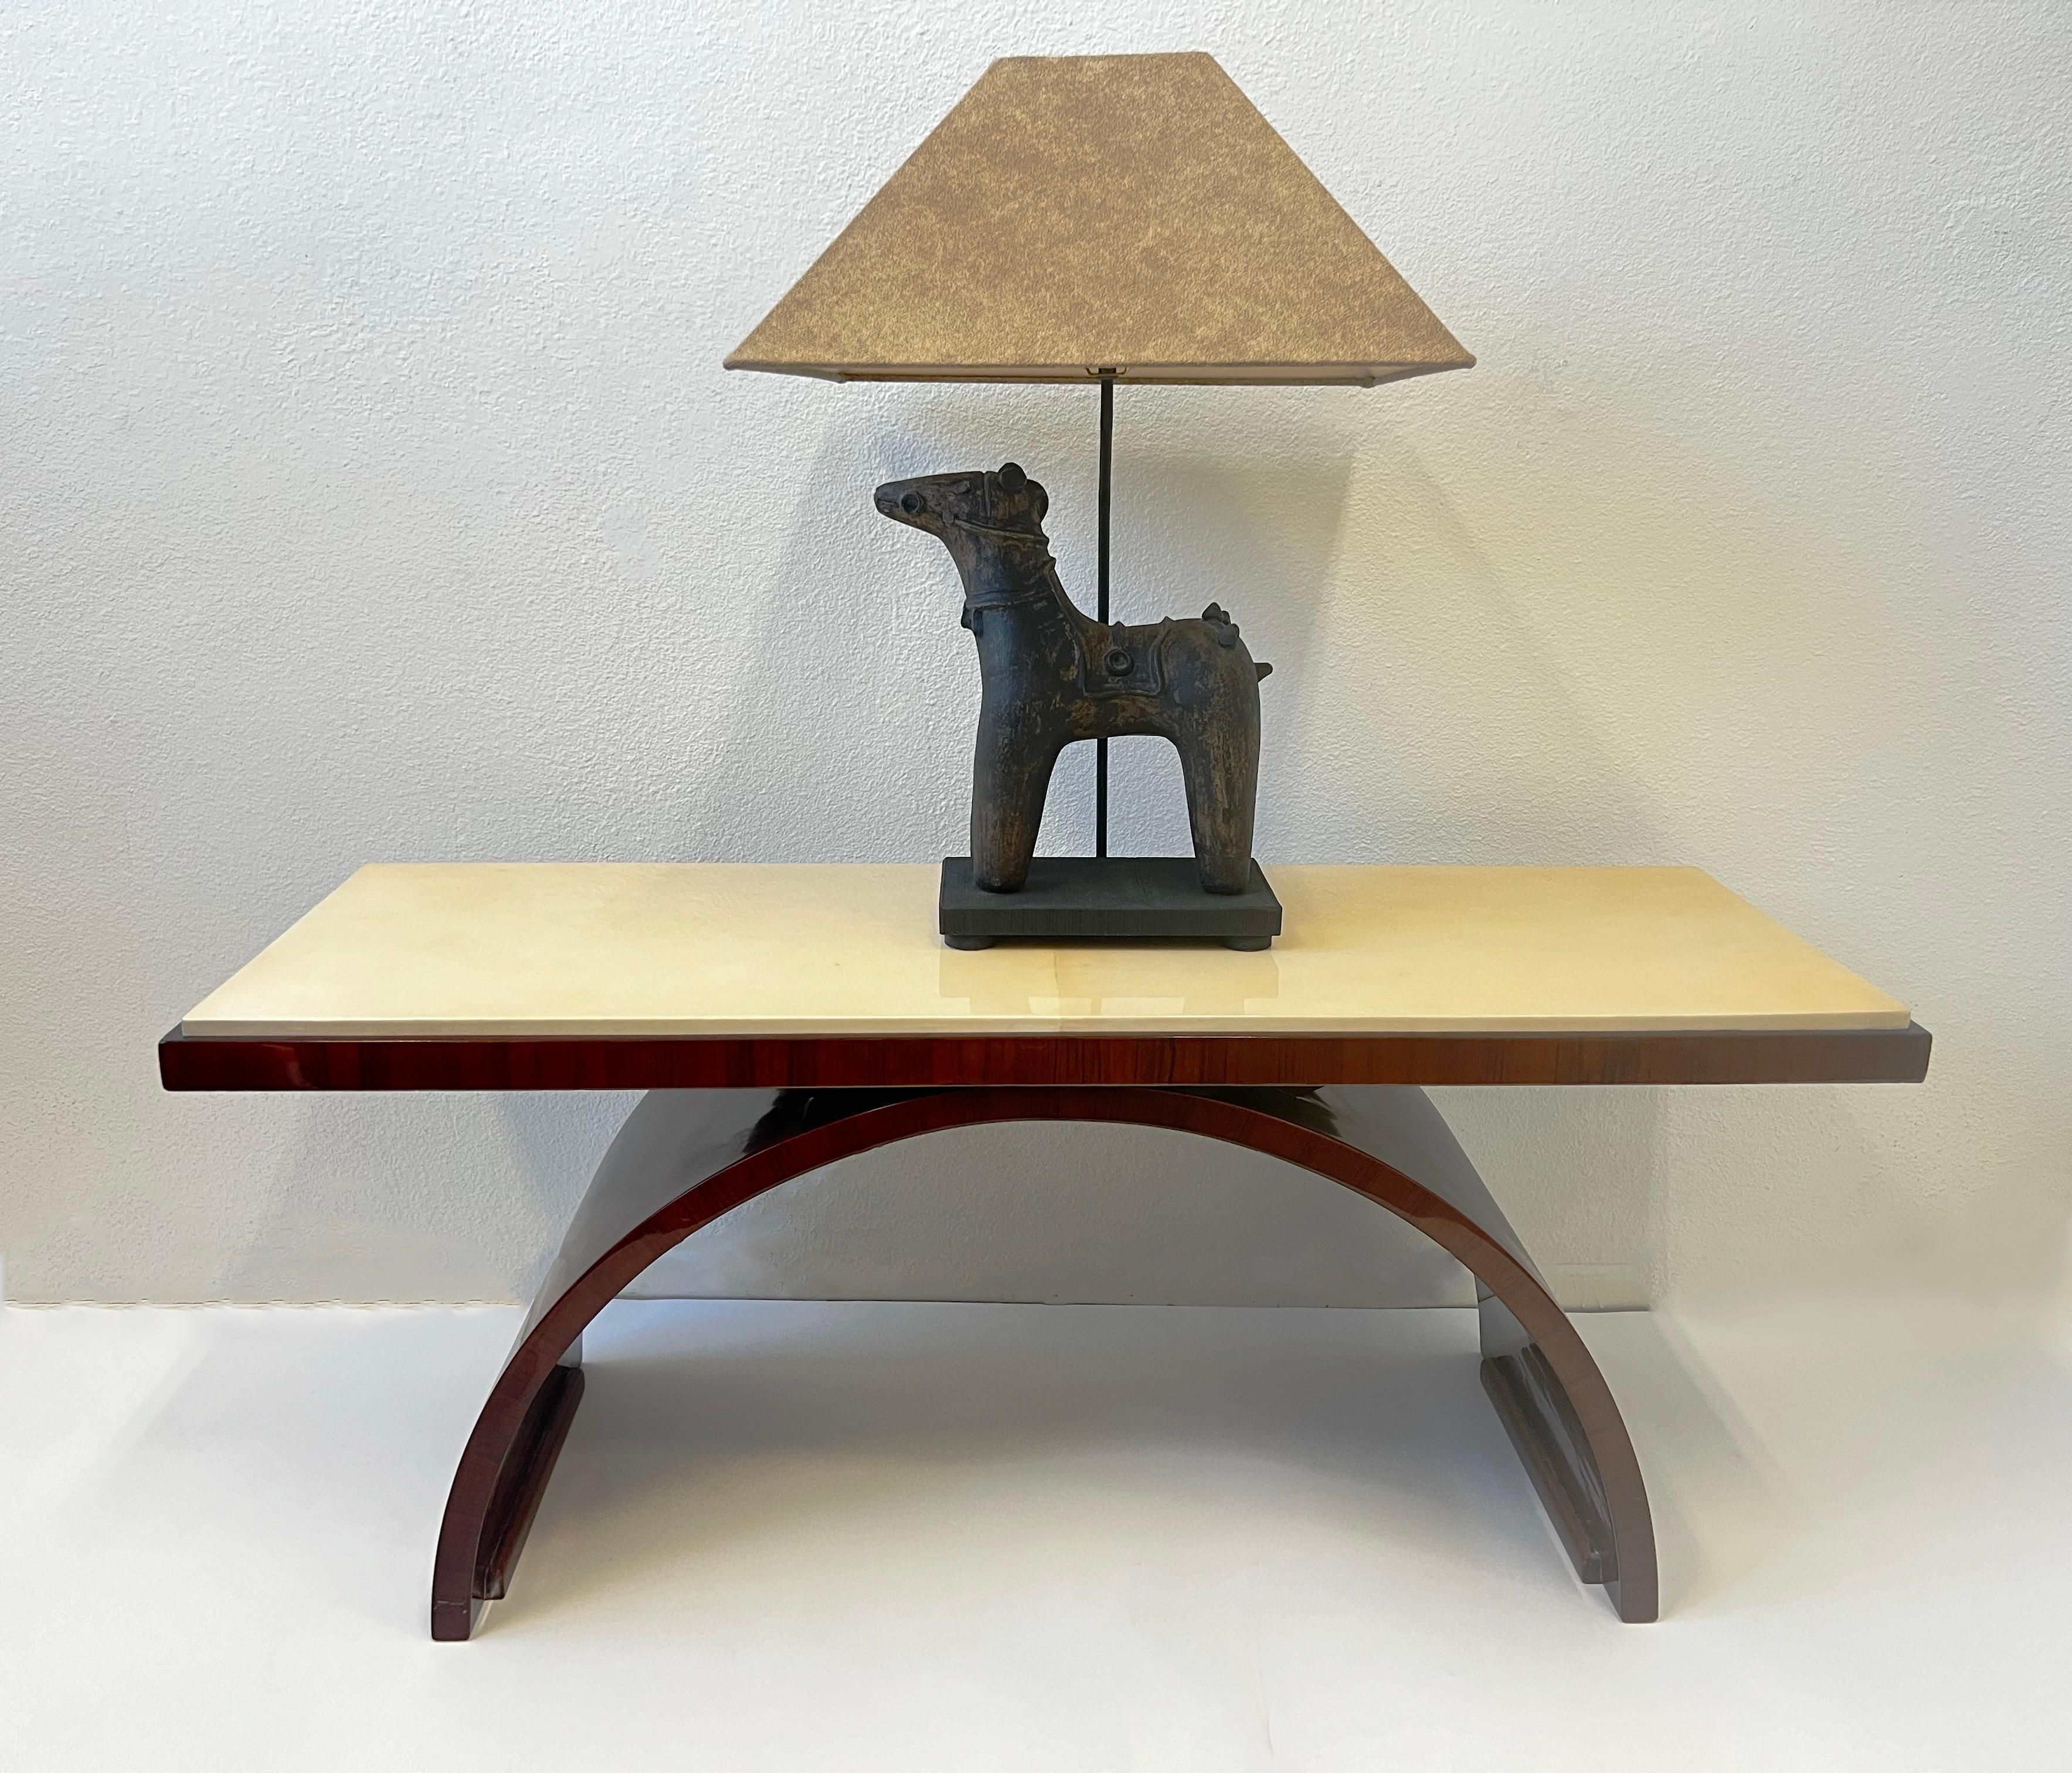 Ceramic Horse Table Lamp by Frederick Cooper In Good Condition For Sale In Palm Springs, CA